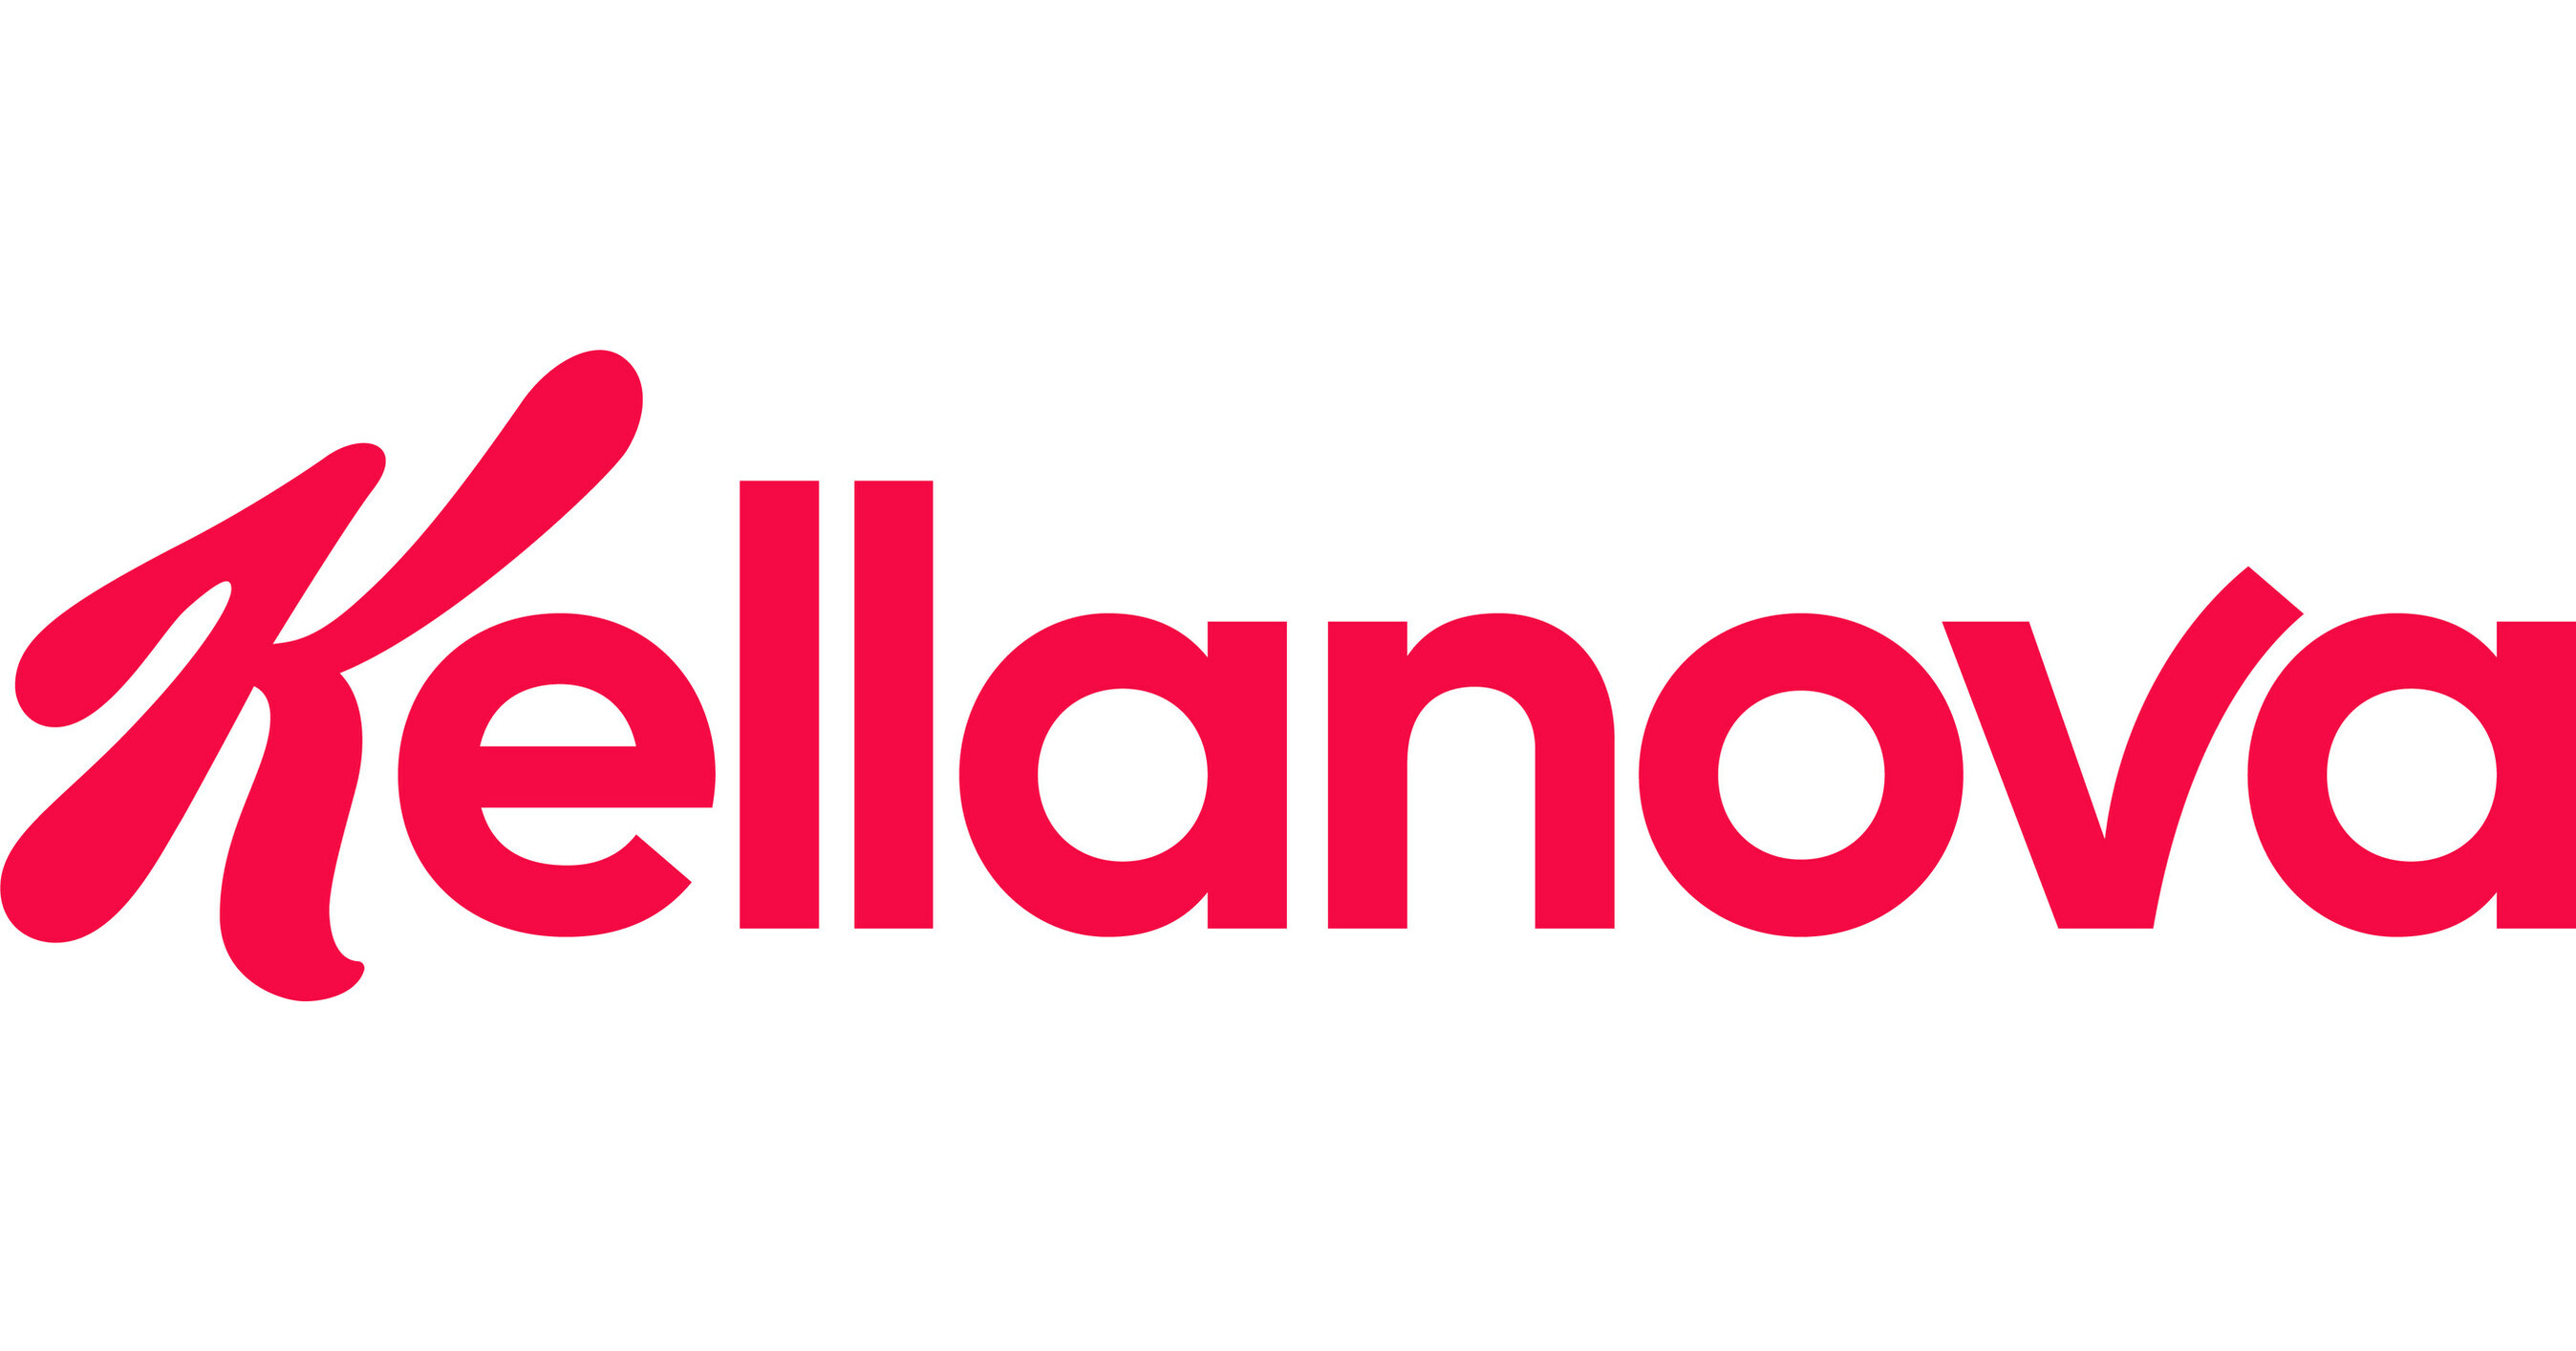 KELLANOVA, FORMERLY KELLOGG COMPANY, ANNOUNCES COMPLETION OF THE SEPARATION OF ITS NORTH AMERICAN CEREAL BUSINESS